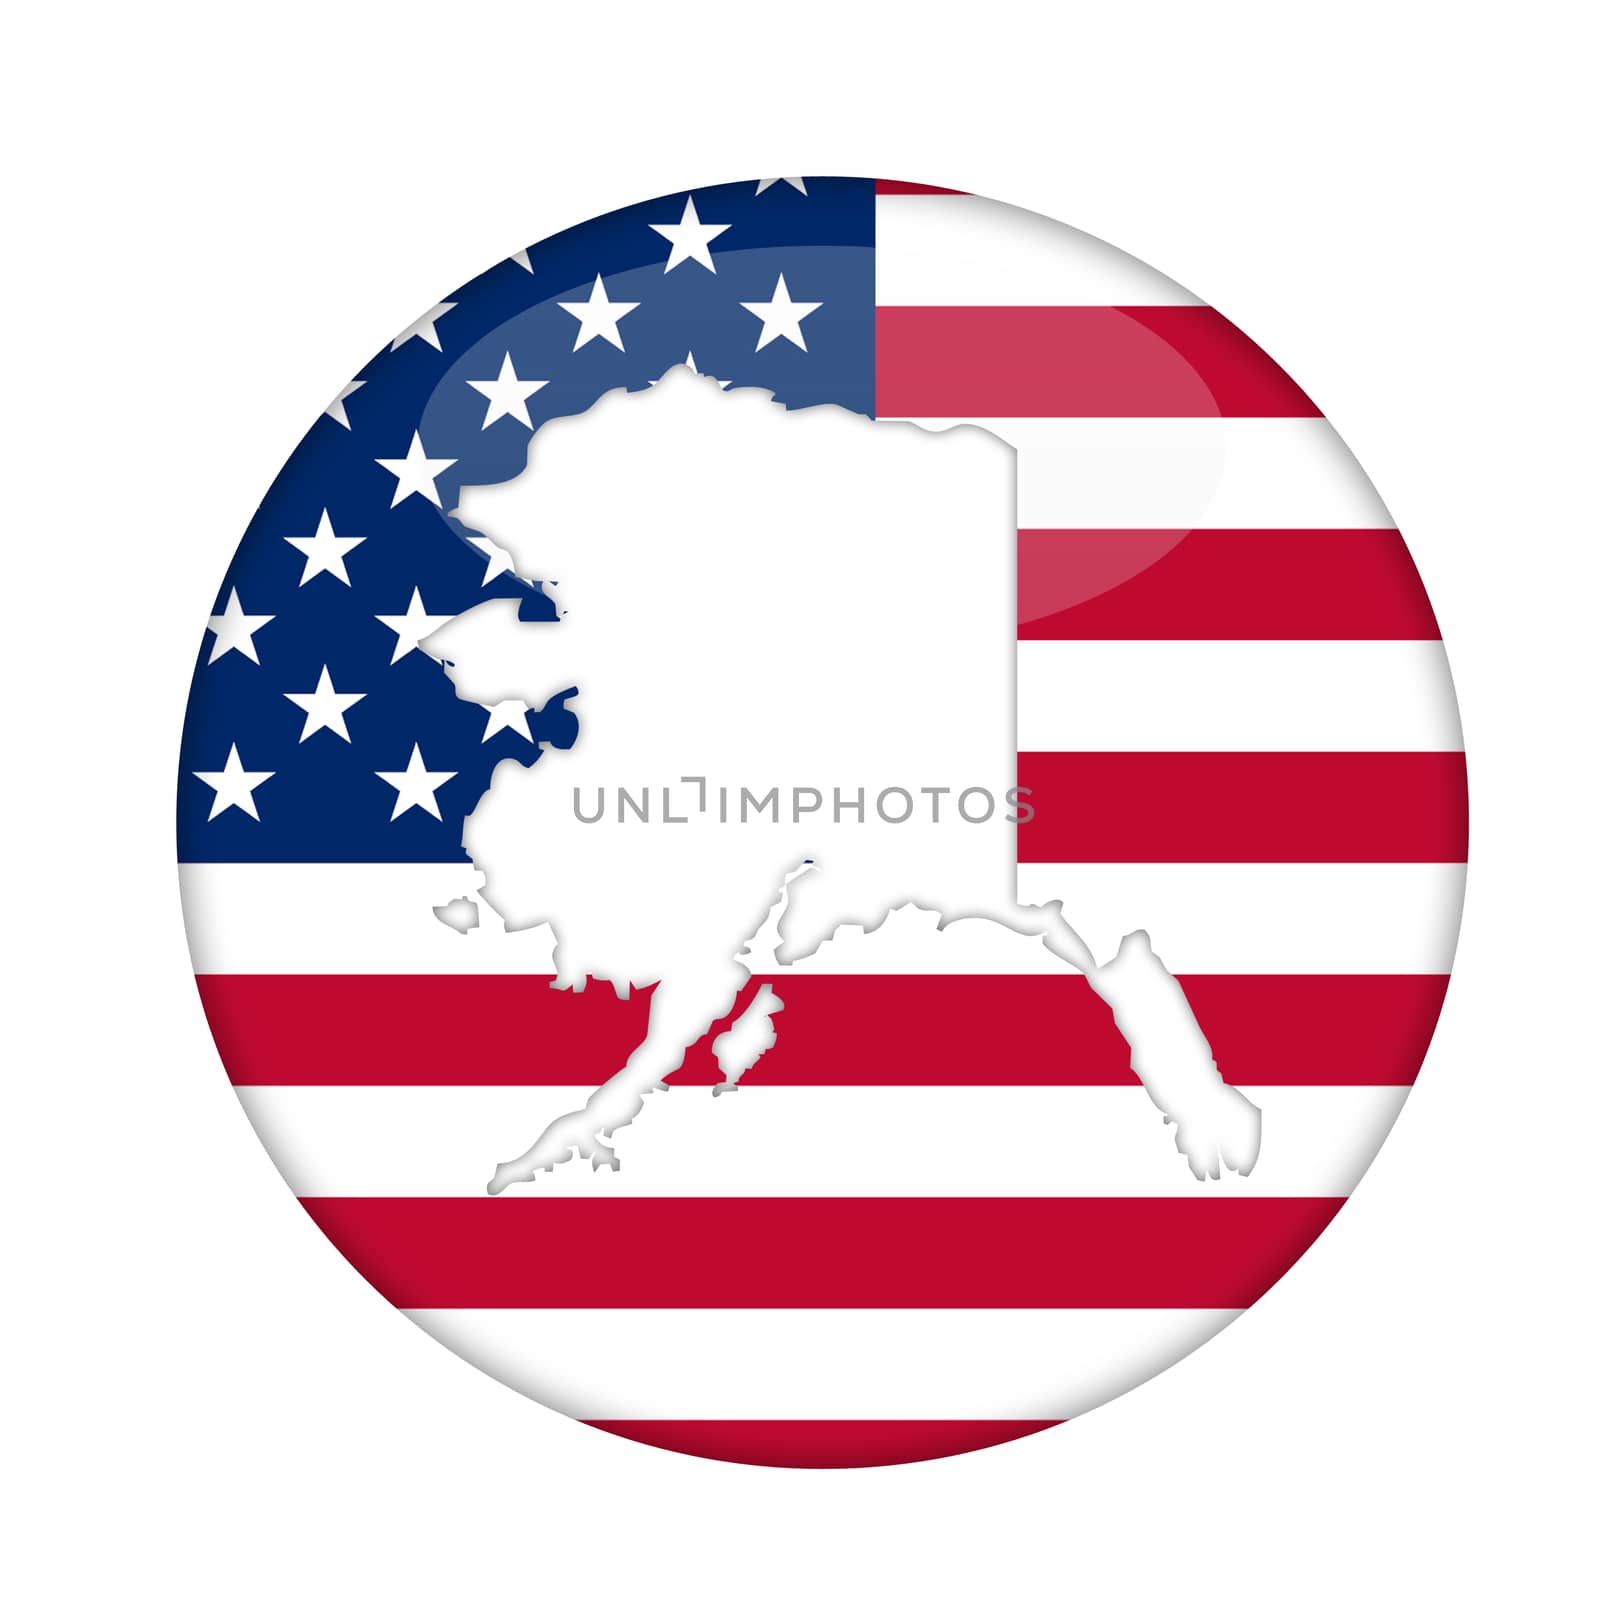 Alaska state of America badge isolated on a white background.